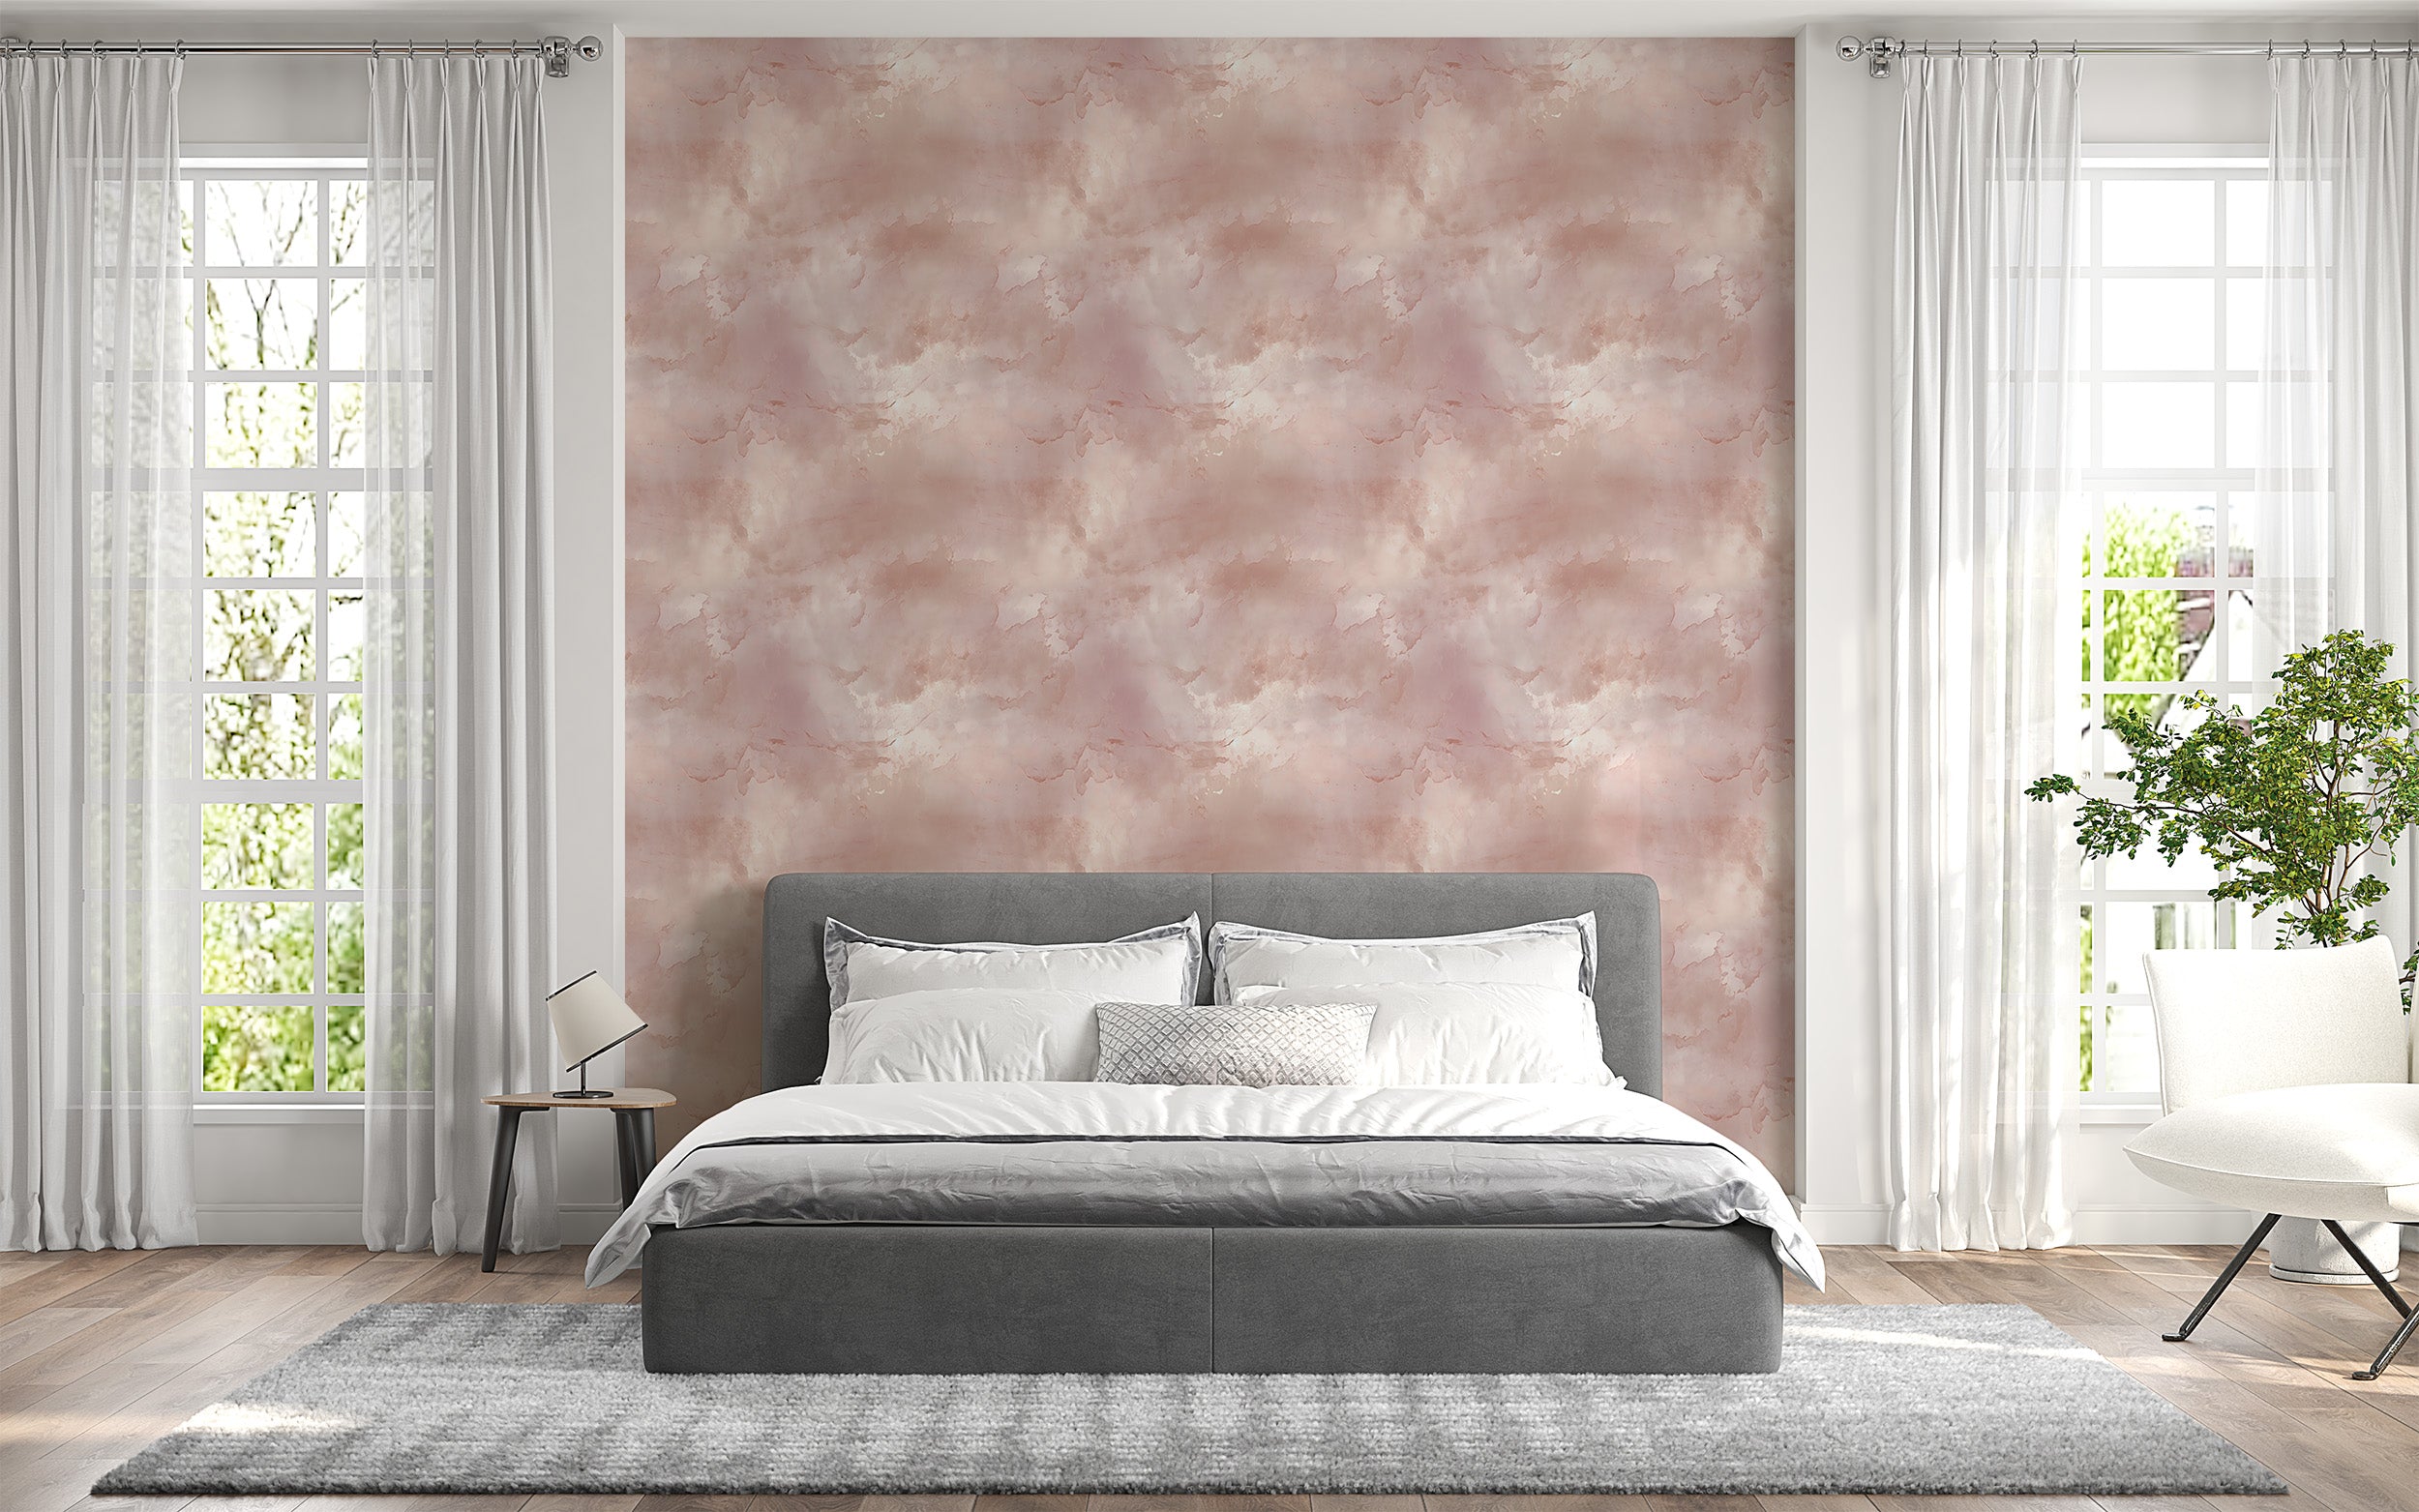 Sophisticated Bedroom Wall Decal in Pink